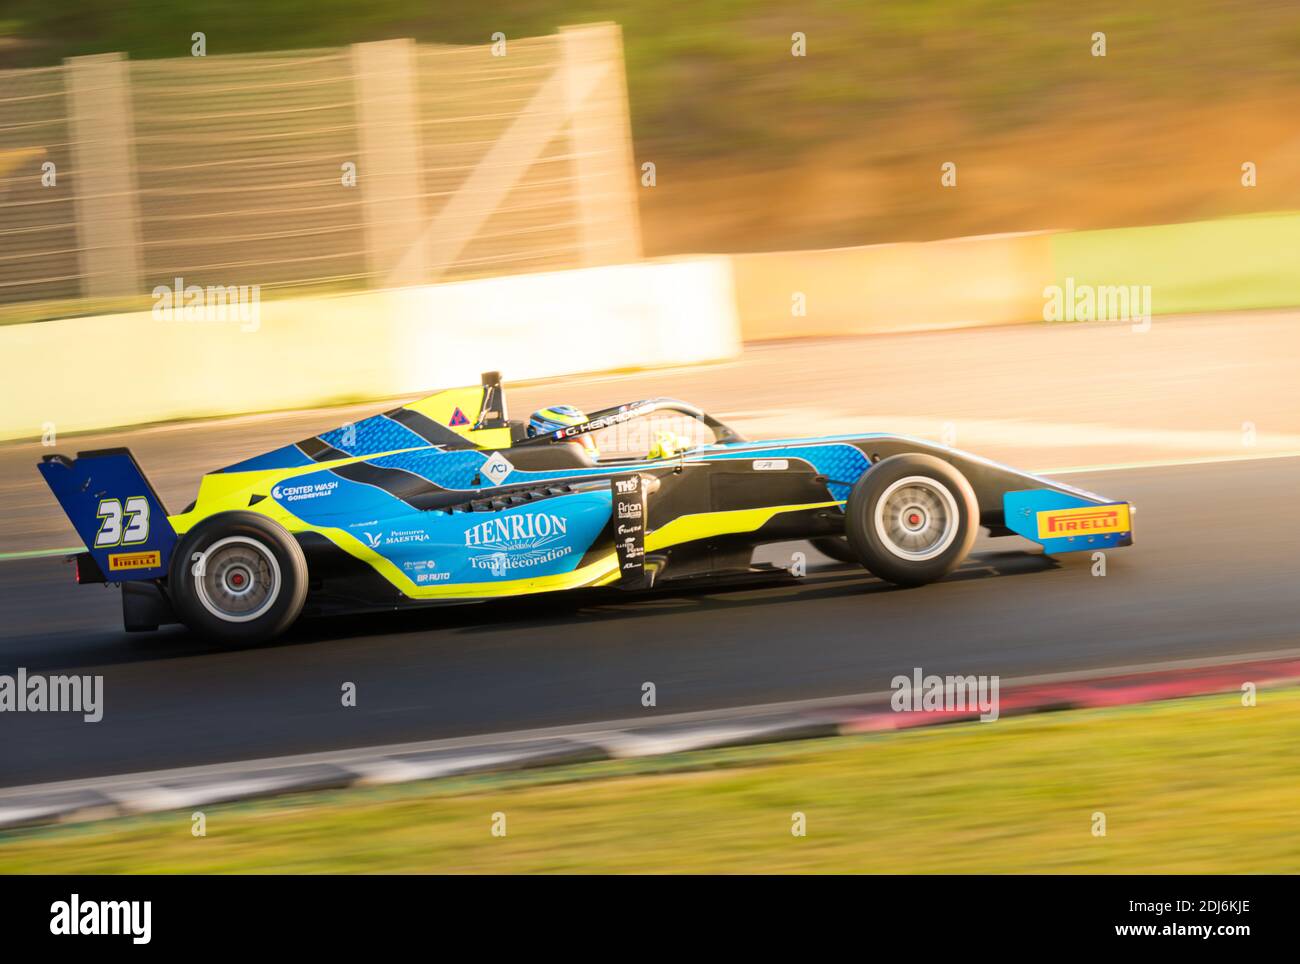 Racing car single seater modern formula in action close up blurred motion background sun flare effect Stock Photo